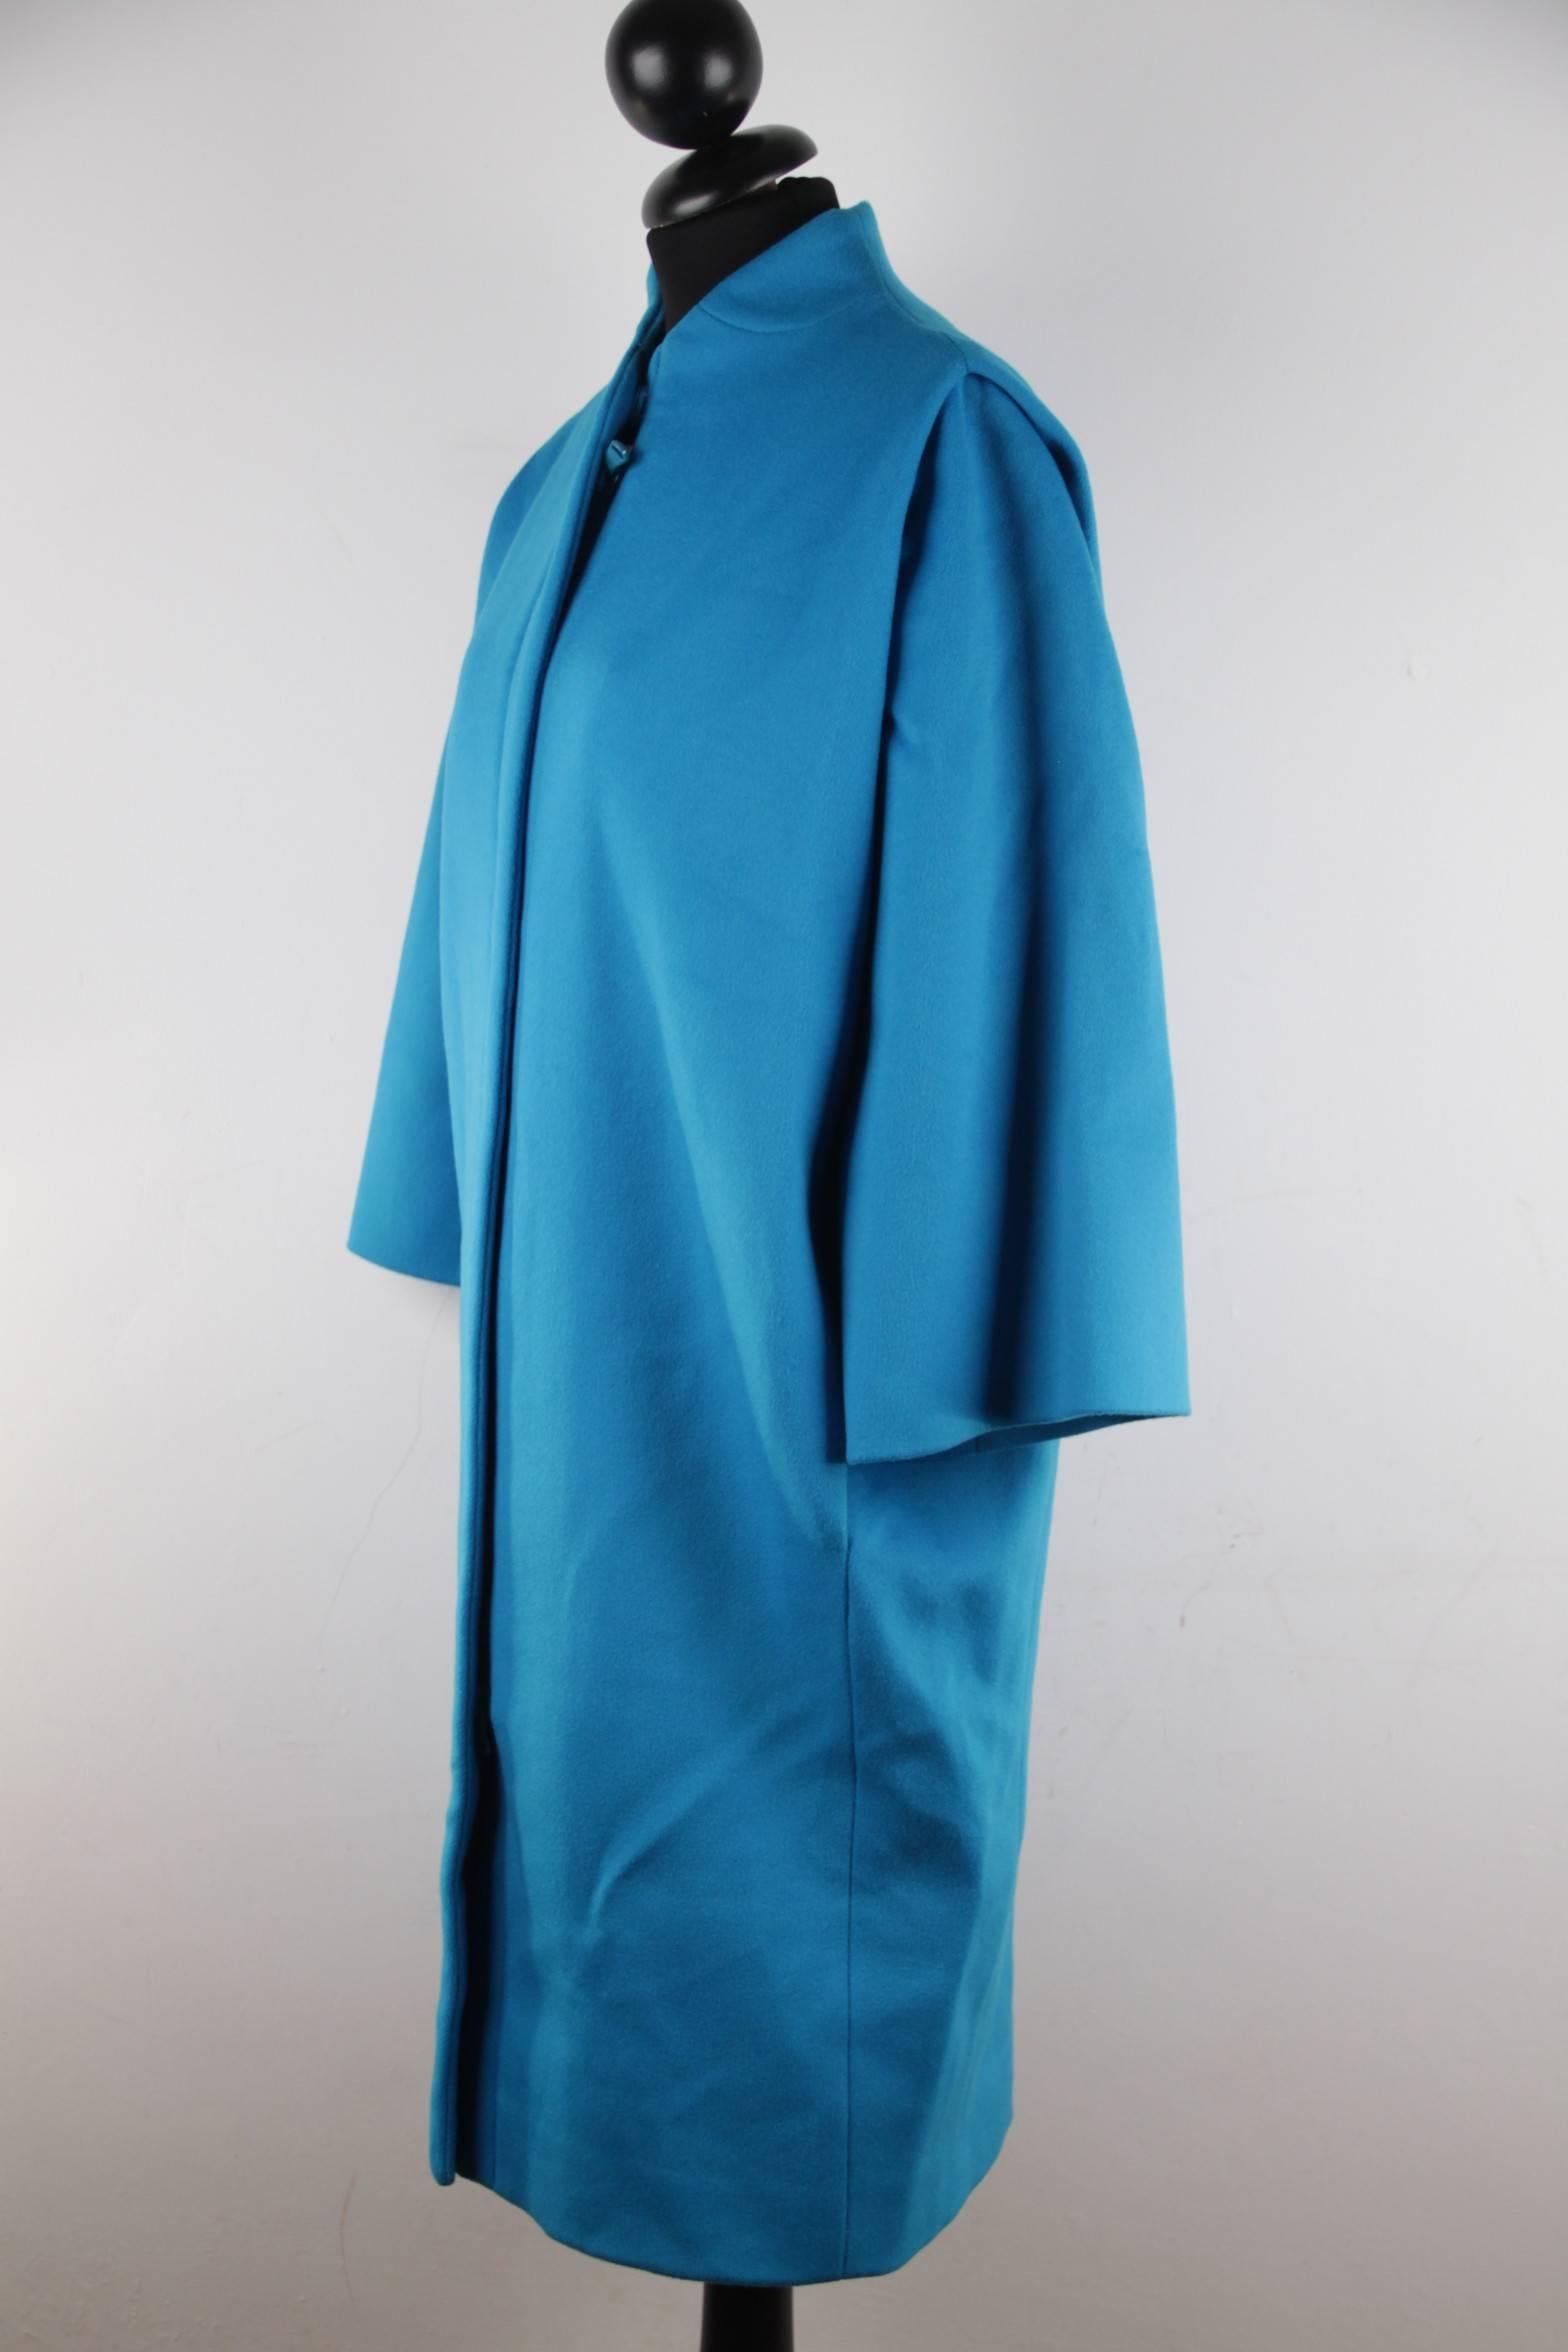 VERSACE Turquoise Wool BUSTIER DRESS & COAT Set SUIT 2007 Fall Collection 40 3